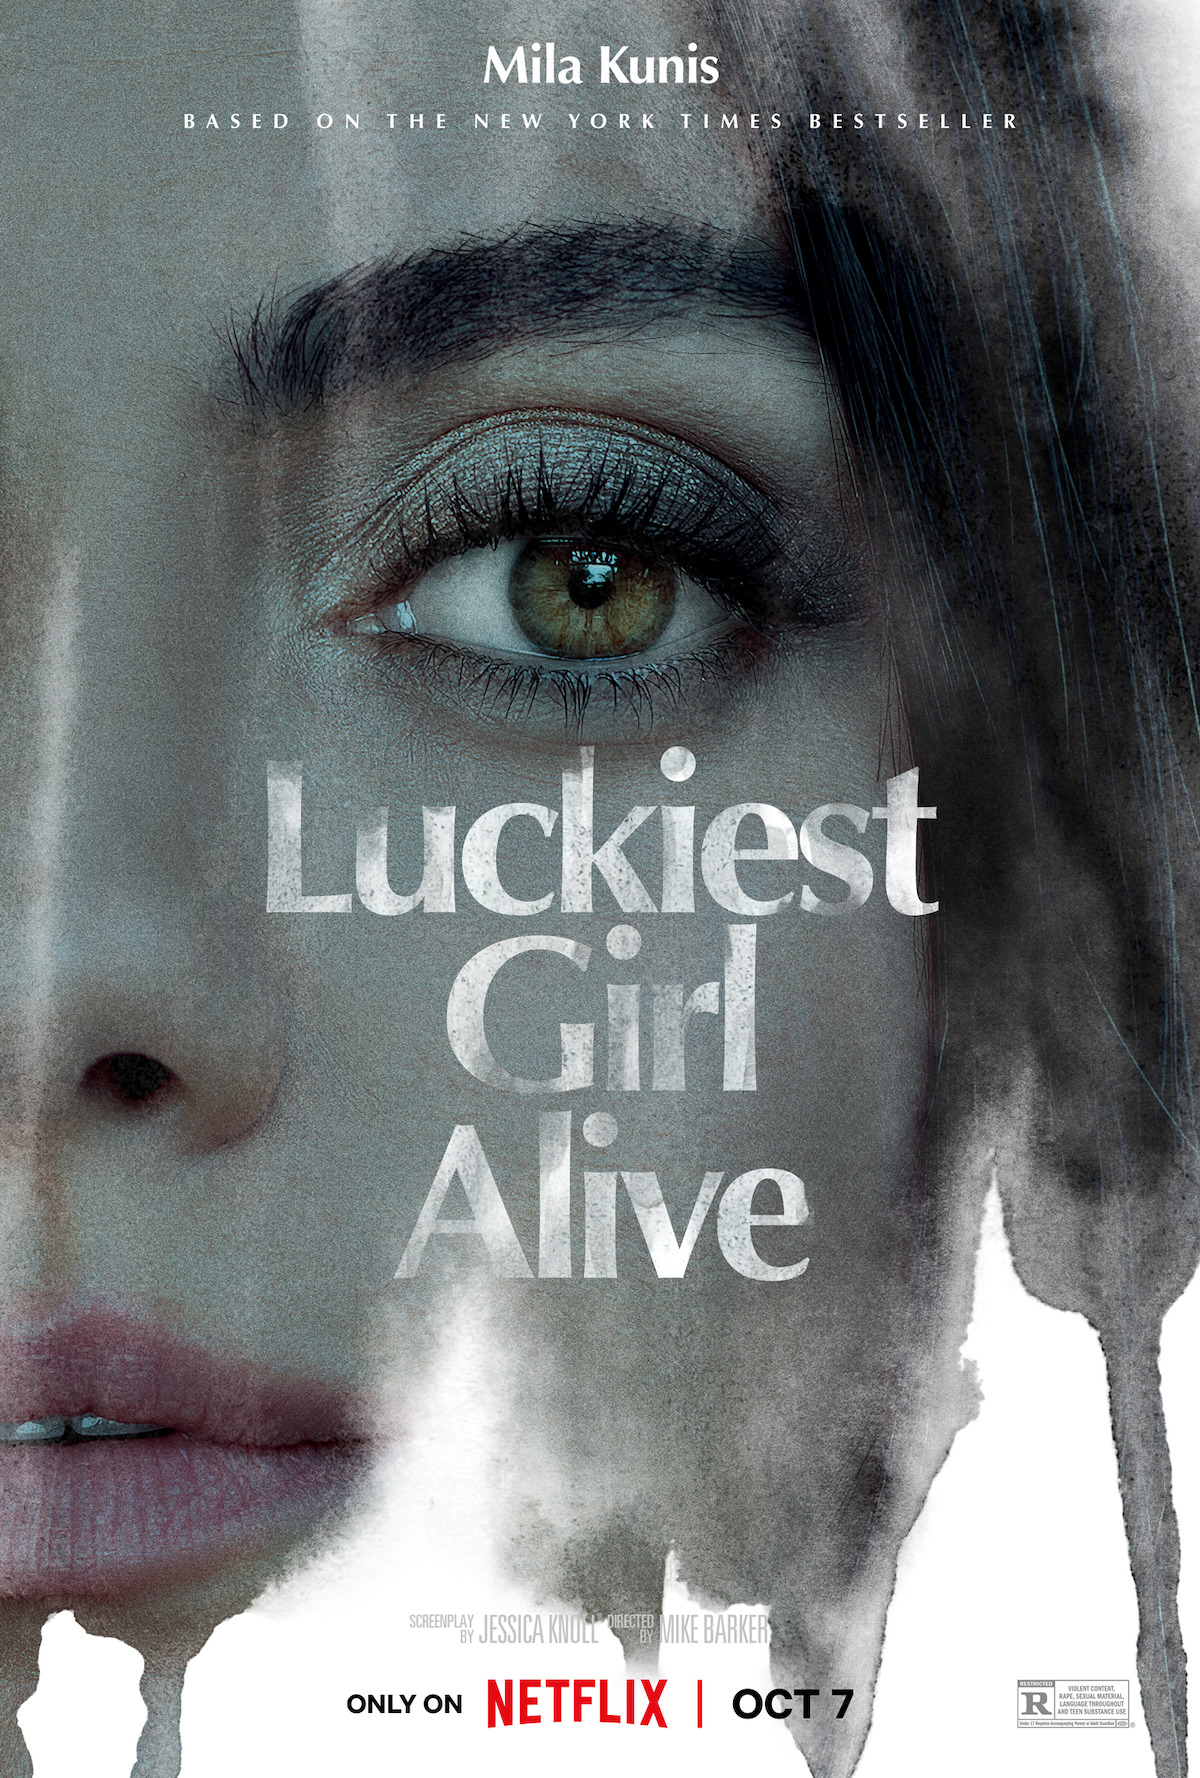 Luckiest Girl Alive' Trailer and First Look Photos Dropped